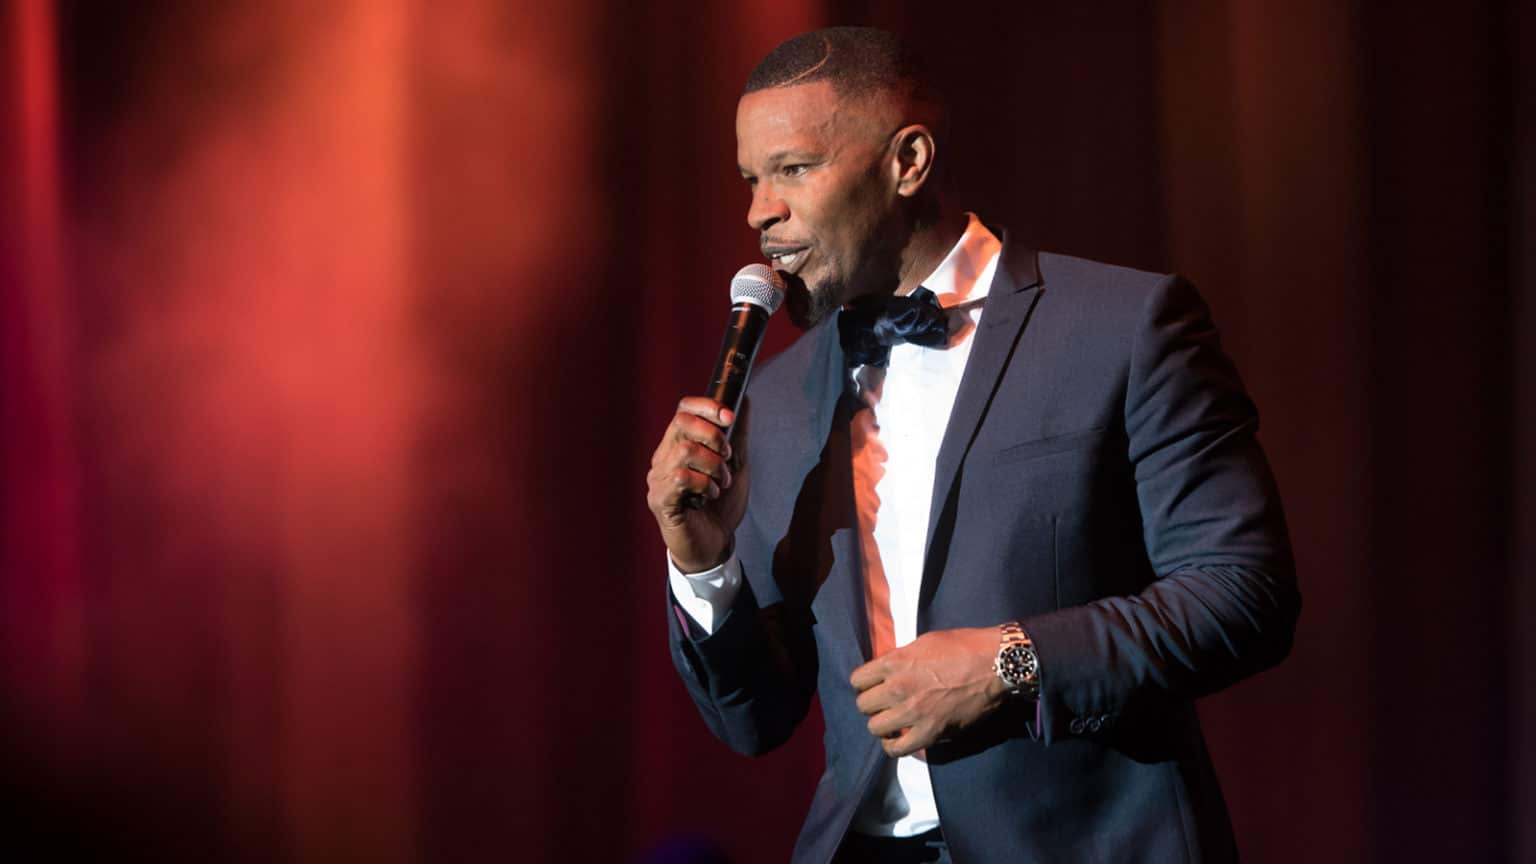 Jamie Foxx at private events